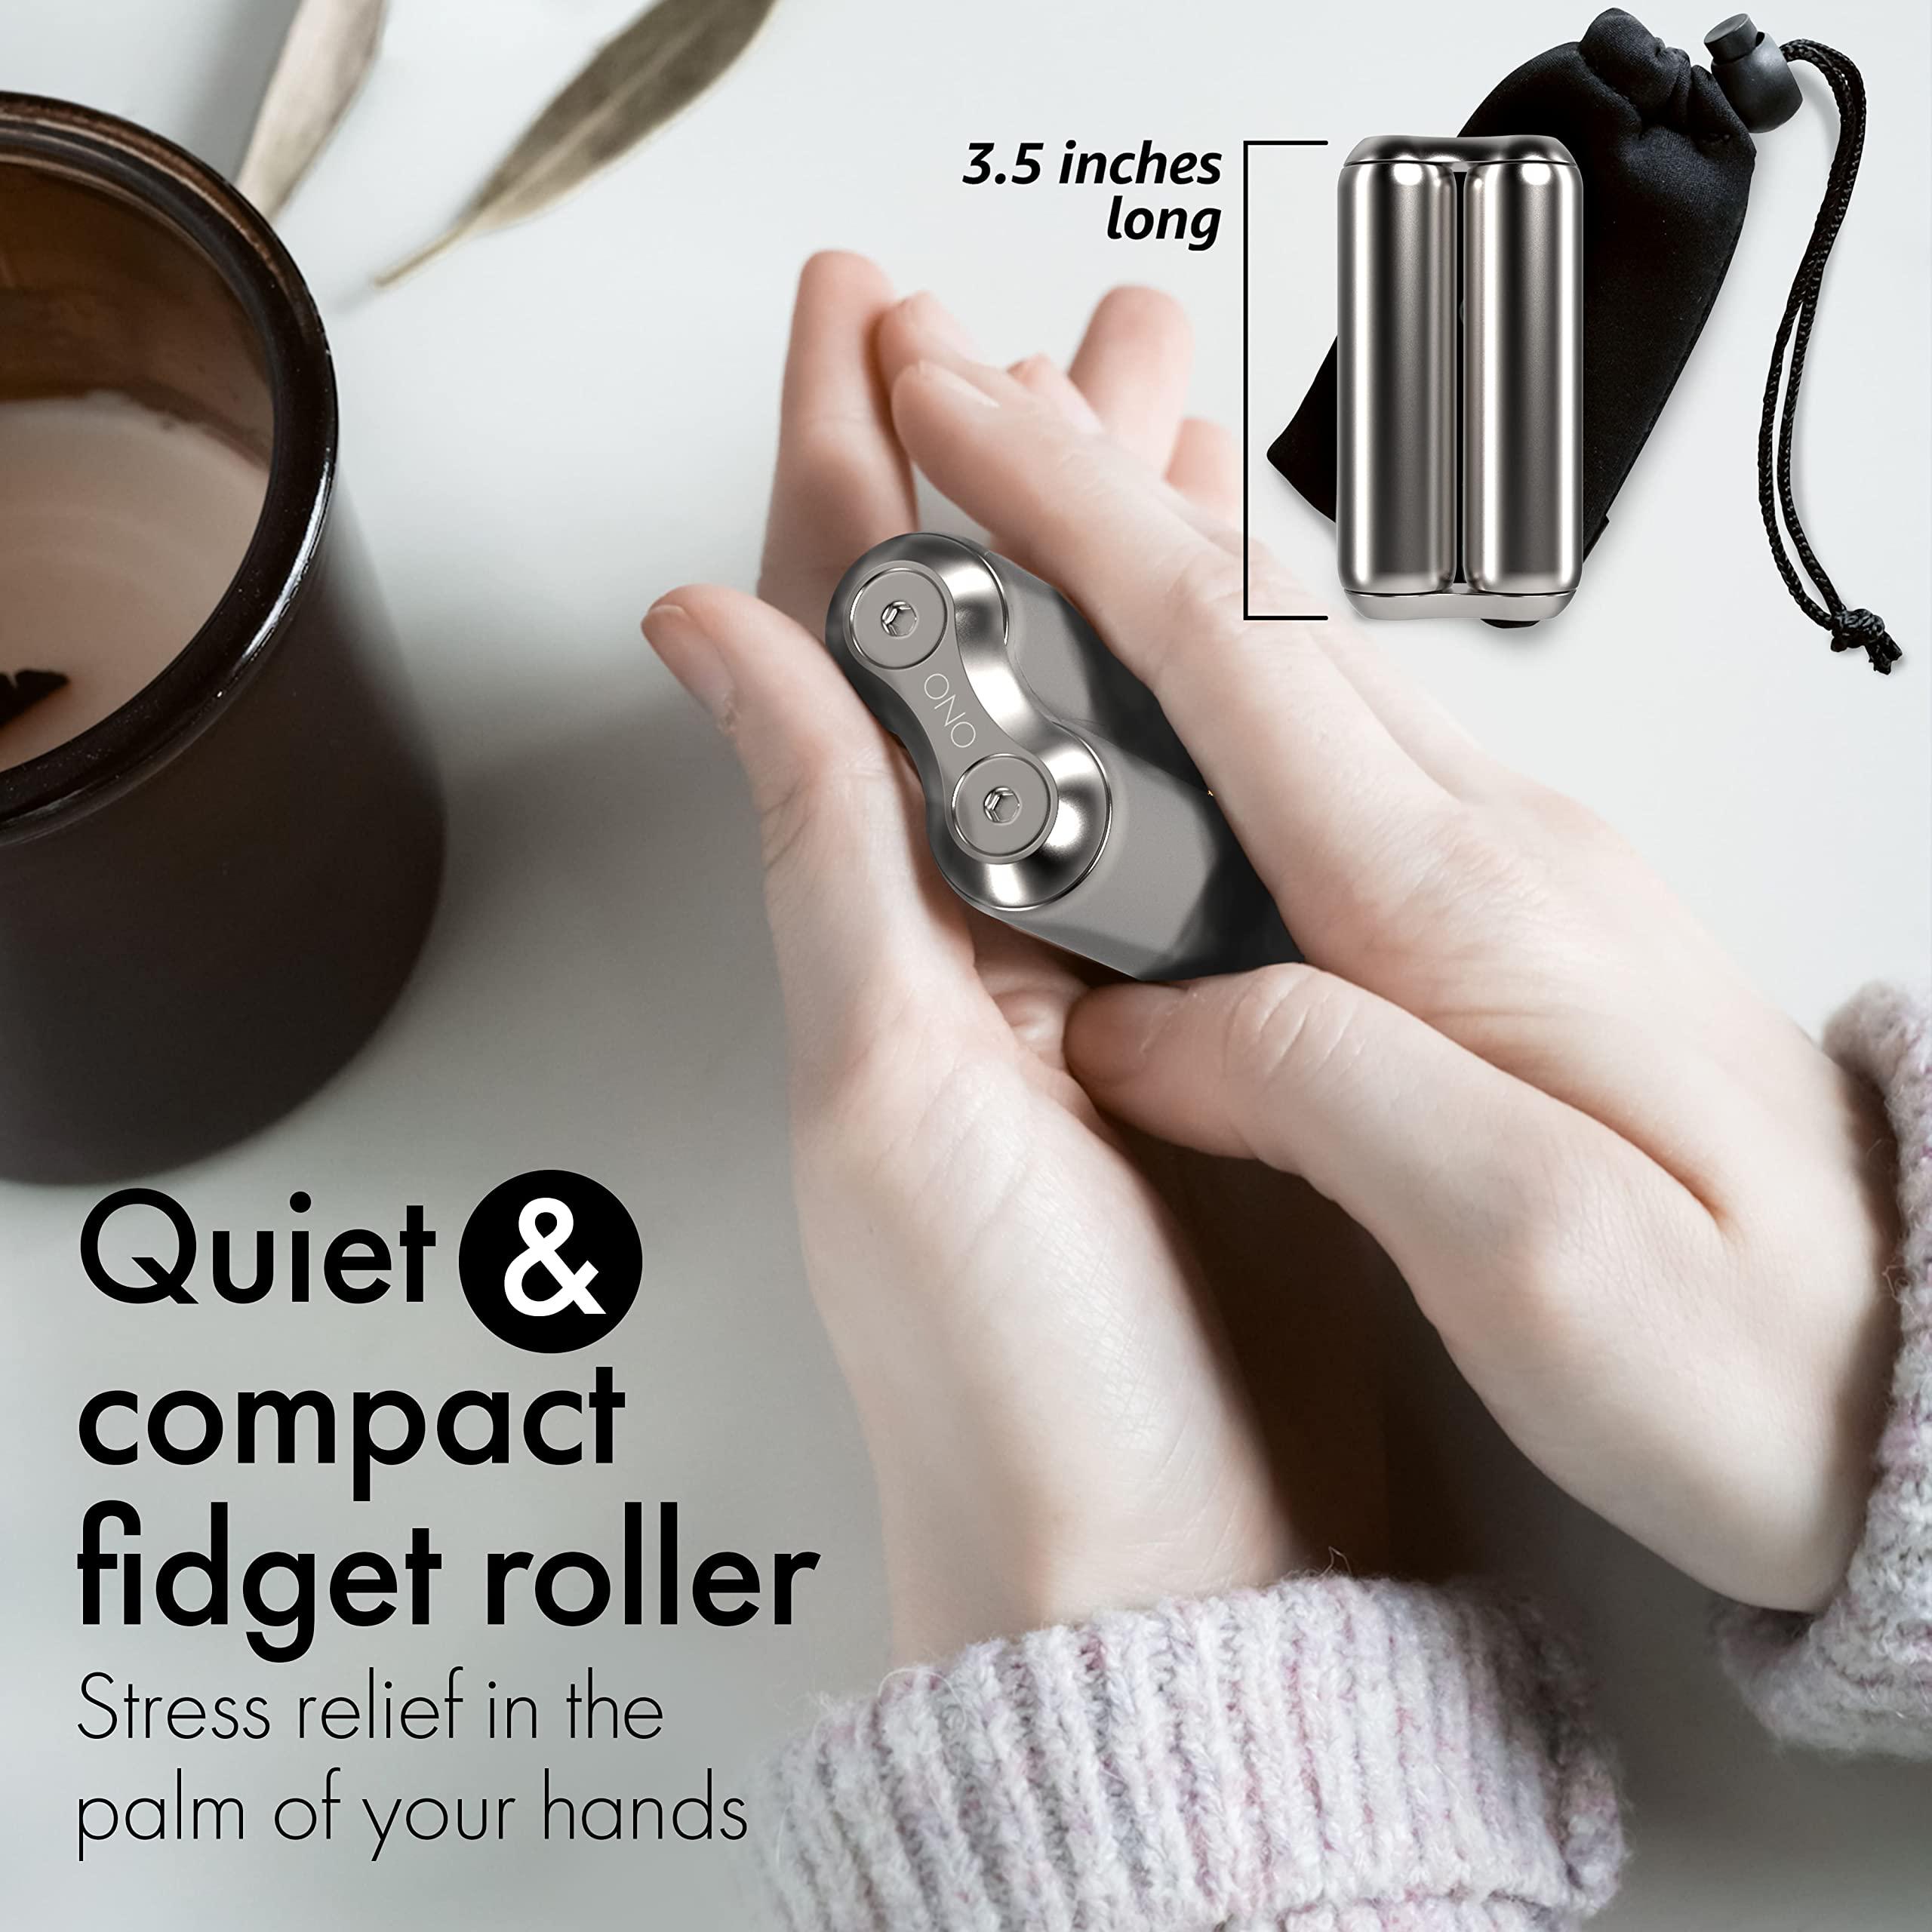 ono roller stainless steel - (the original) handheld fidget toy for adults | relieve stress, anxiety, tension | promotes focu